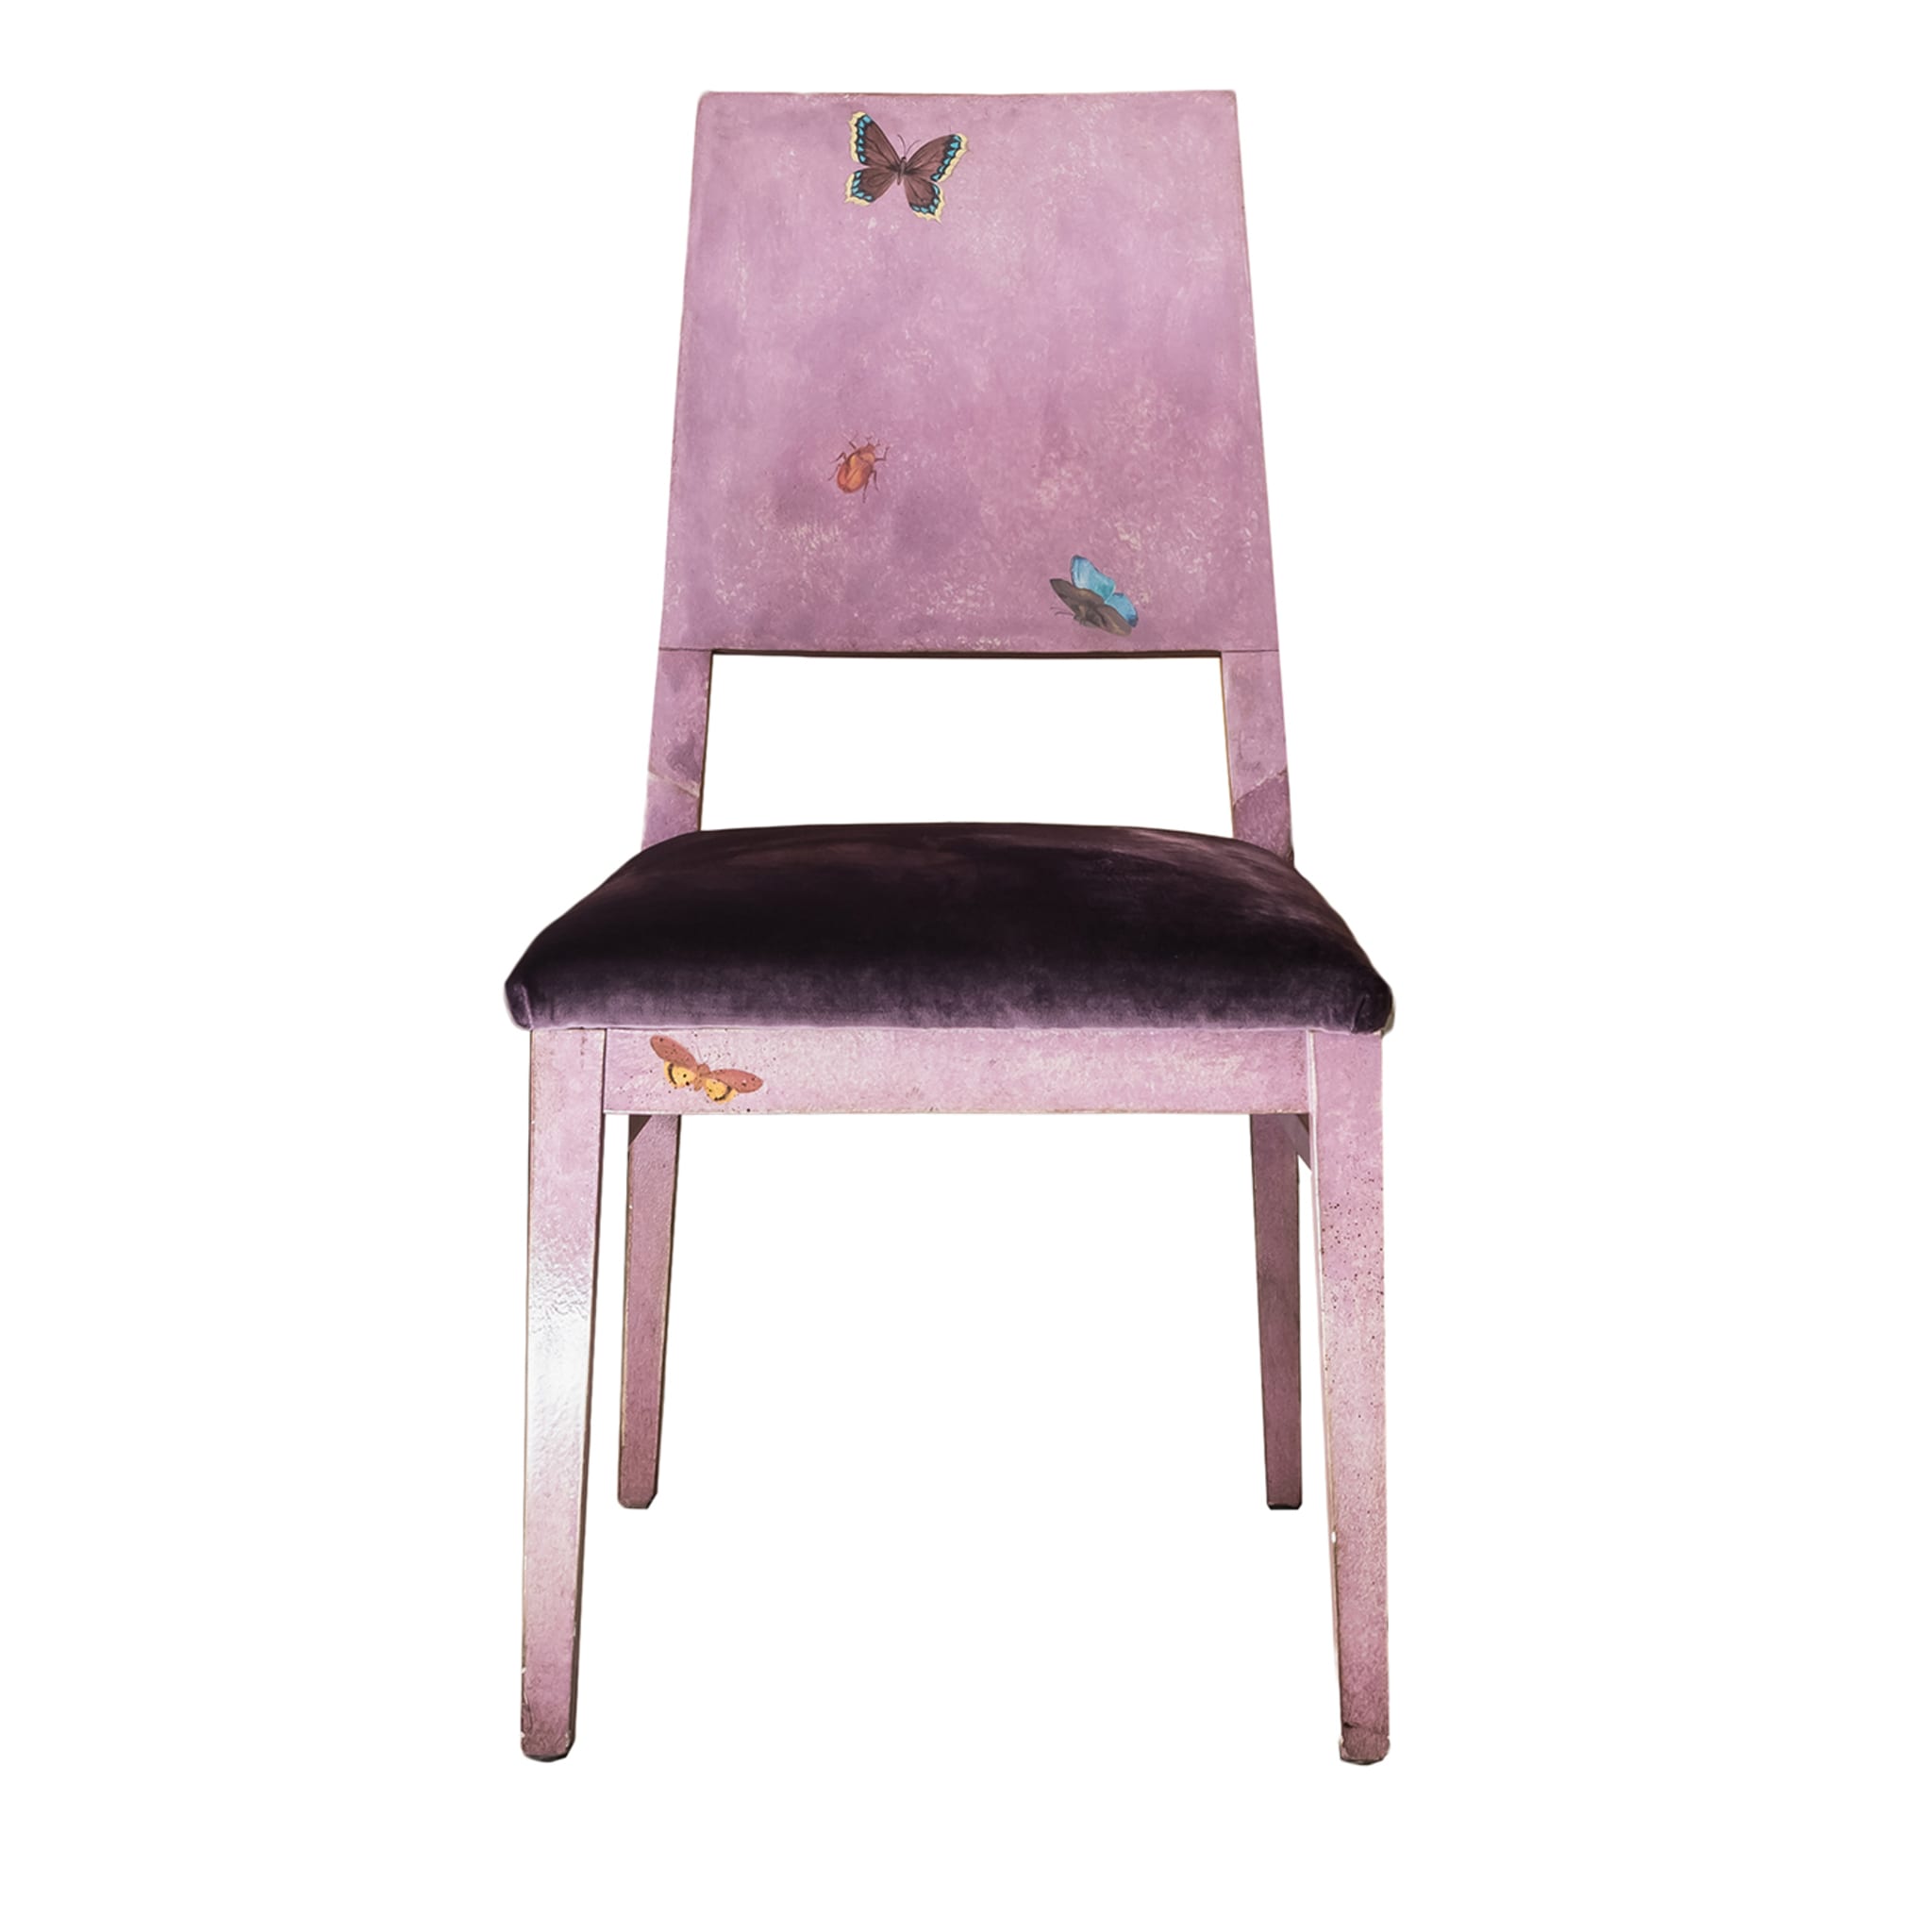 Cremona Violet Indigo with Butterflies Dining Chair - Main view